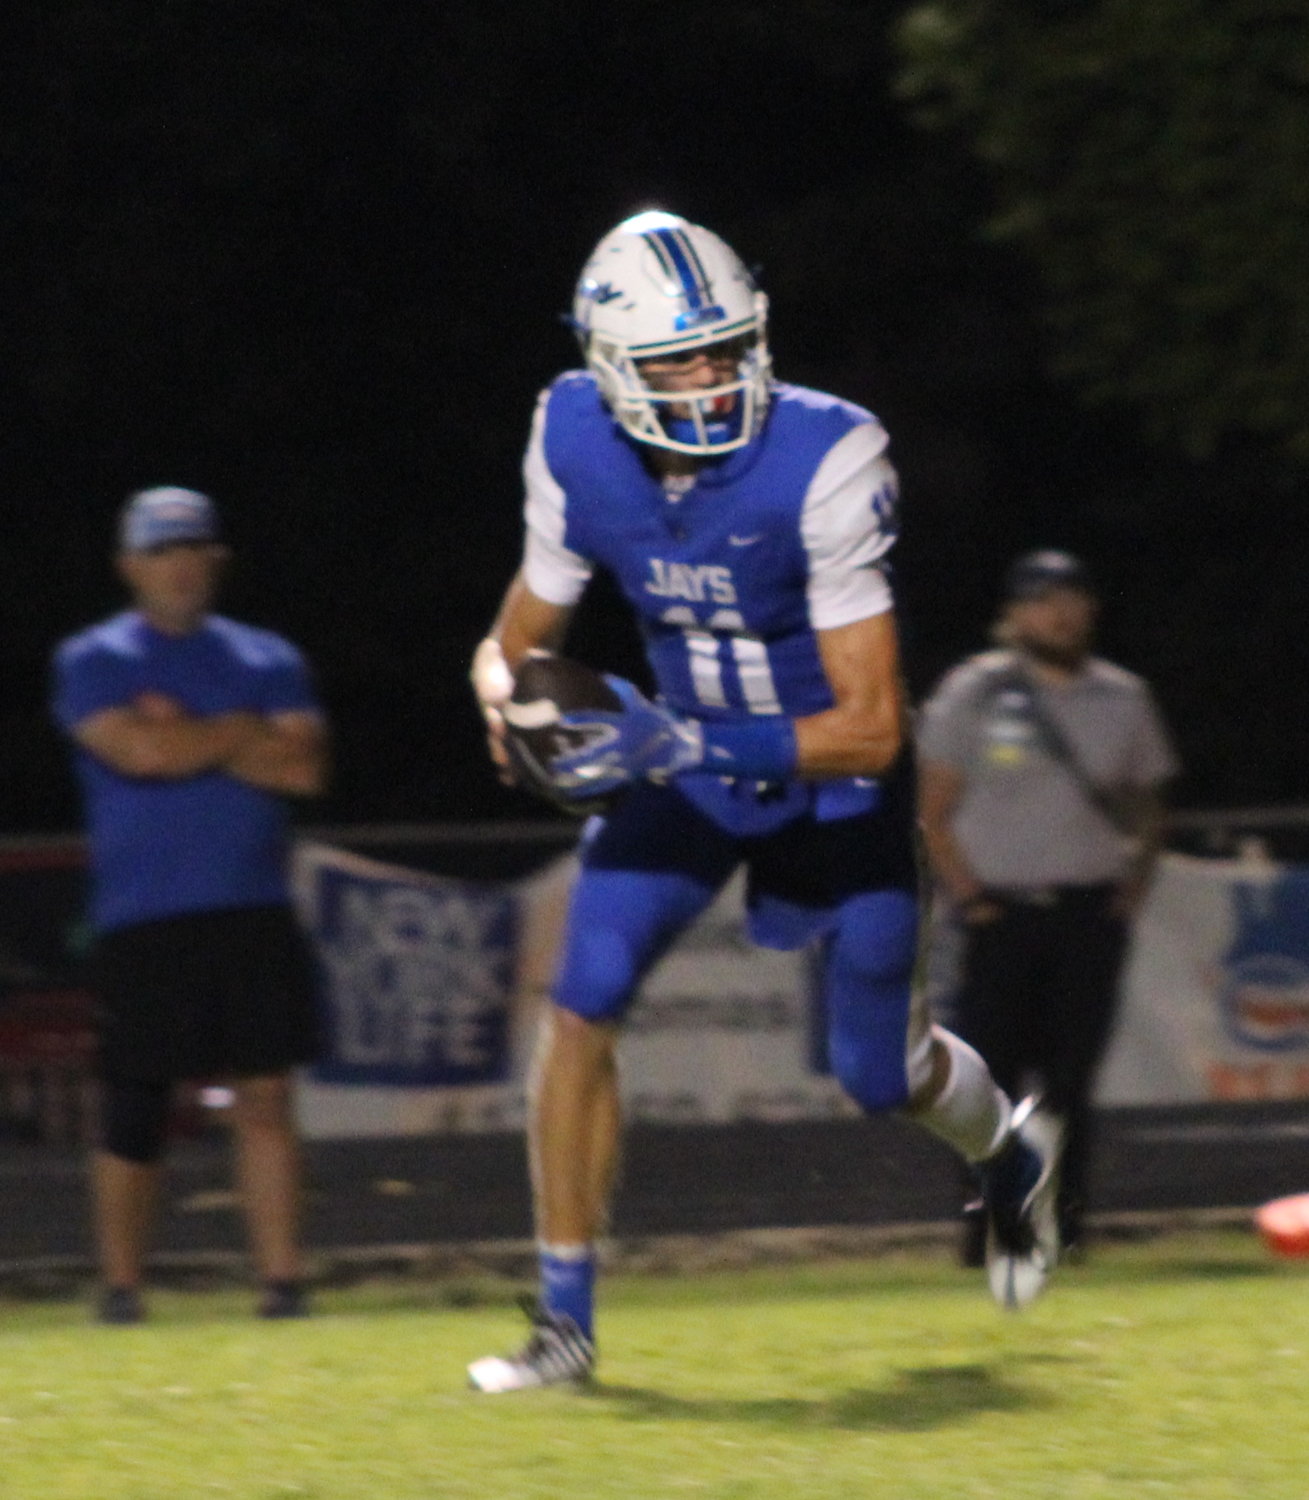 #11 Bryant Bull dashes for room to complete a five yard pass securing the Bluejays their third touchdown of the evening against the Tigers.